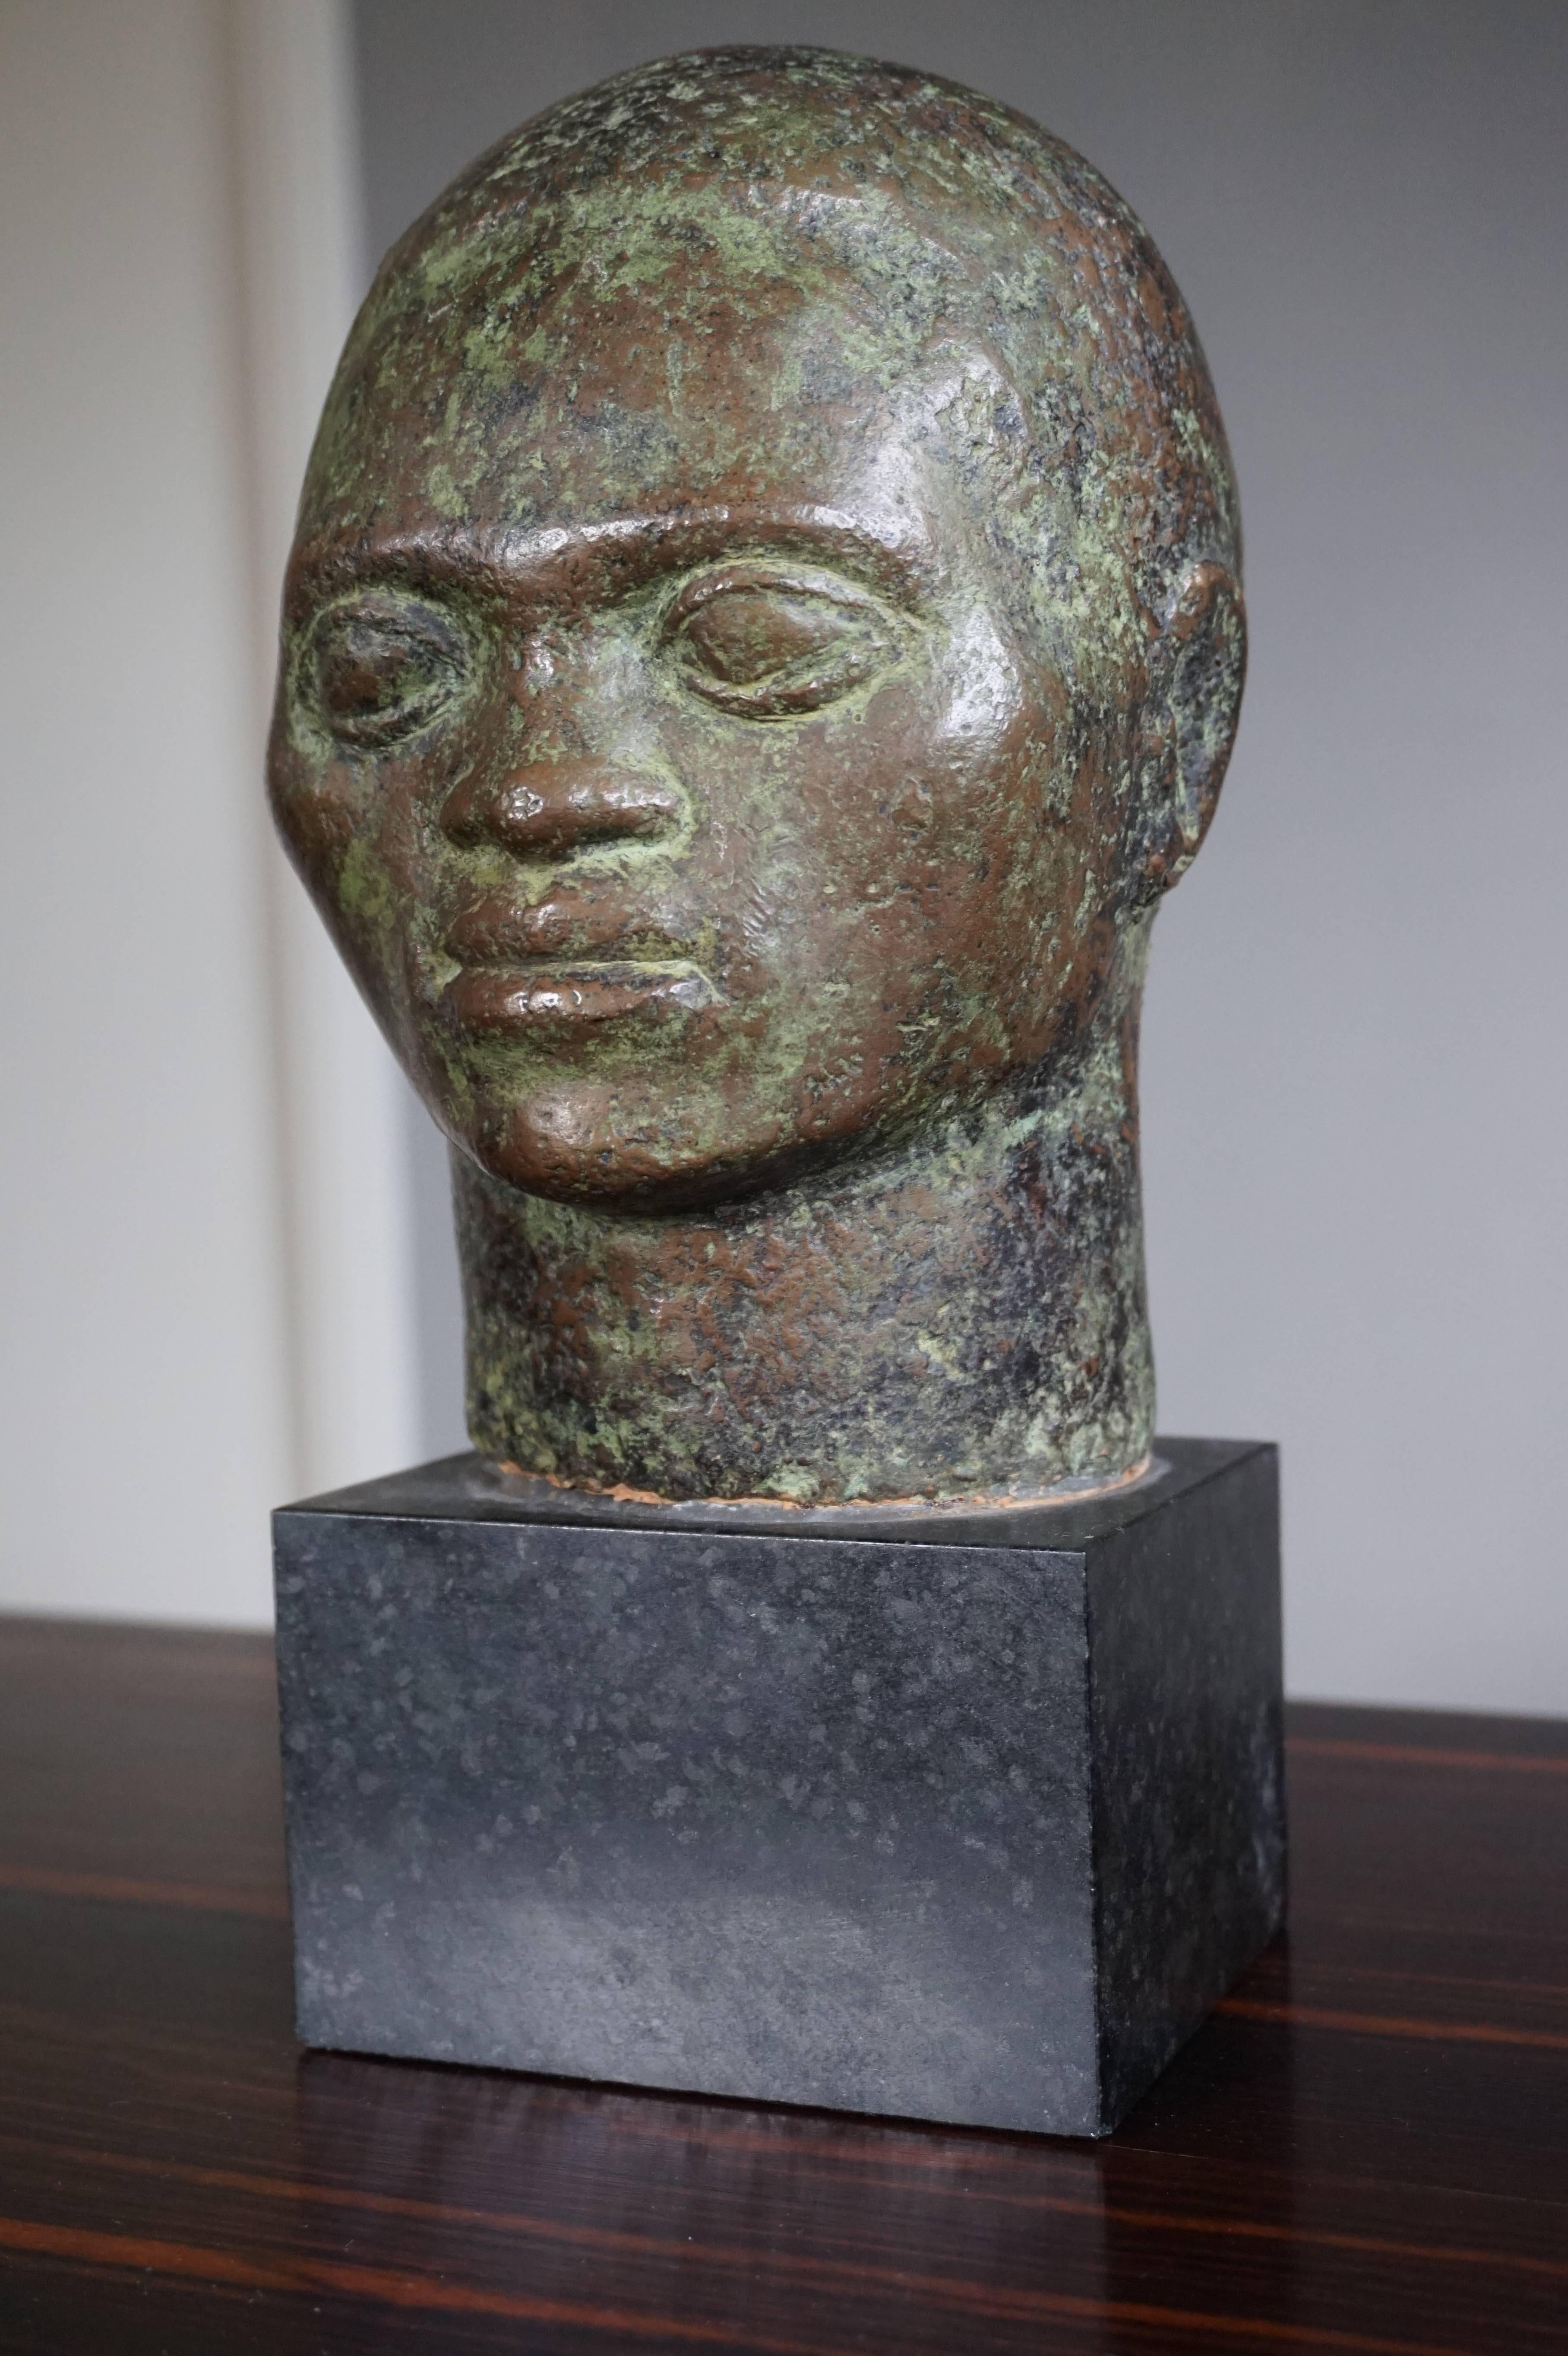 Unique bronze sculpture and a fine work of art.

This serene yet strong face on an evenly strong neck 'spoke to me'. For me that has always been the best reason for purchasing an antique or a work of art. The surface of this bronze and its patina